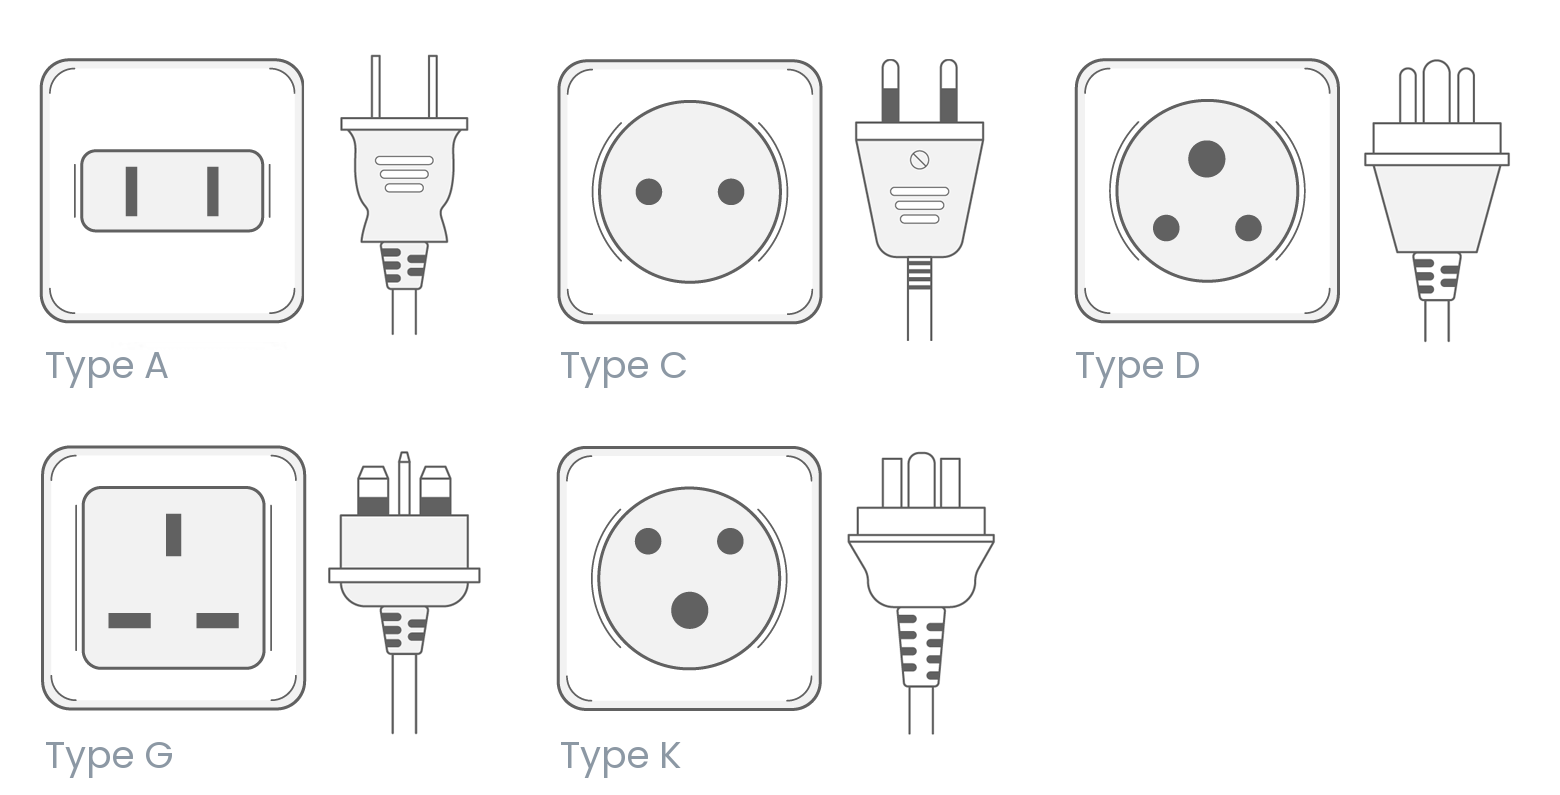 Dhaka electrical outlets and plug types